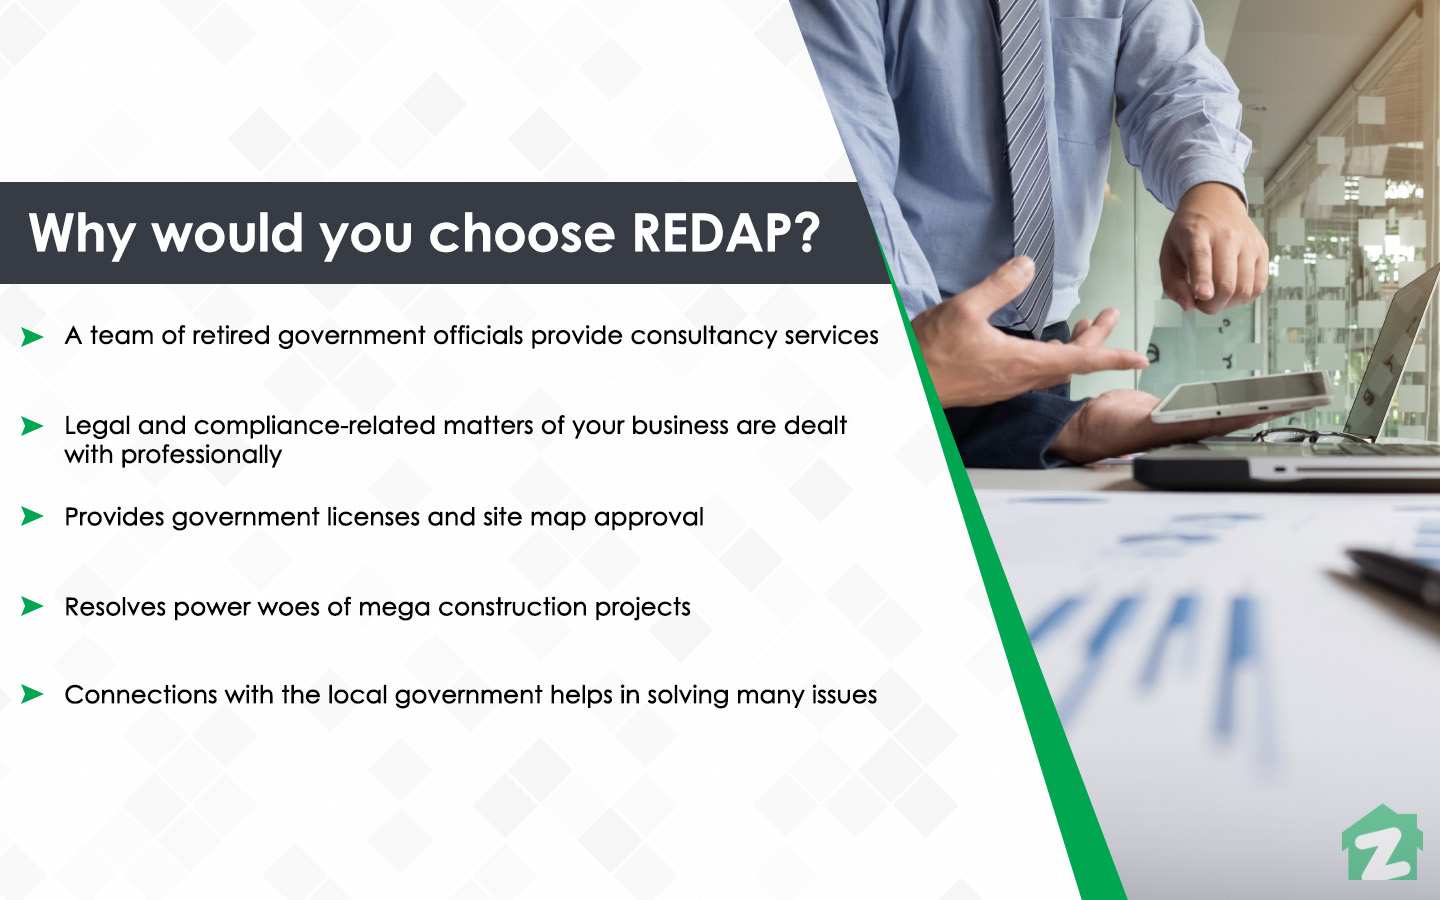 REDAP provides complete business solutions of all your property needs